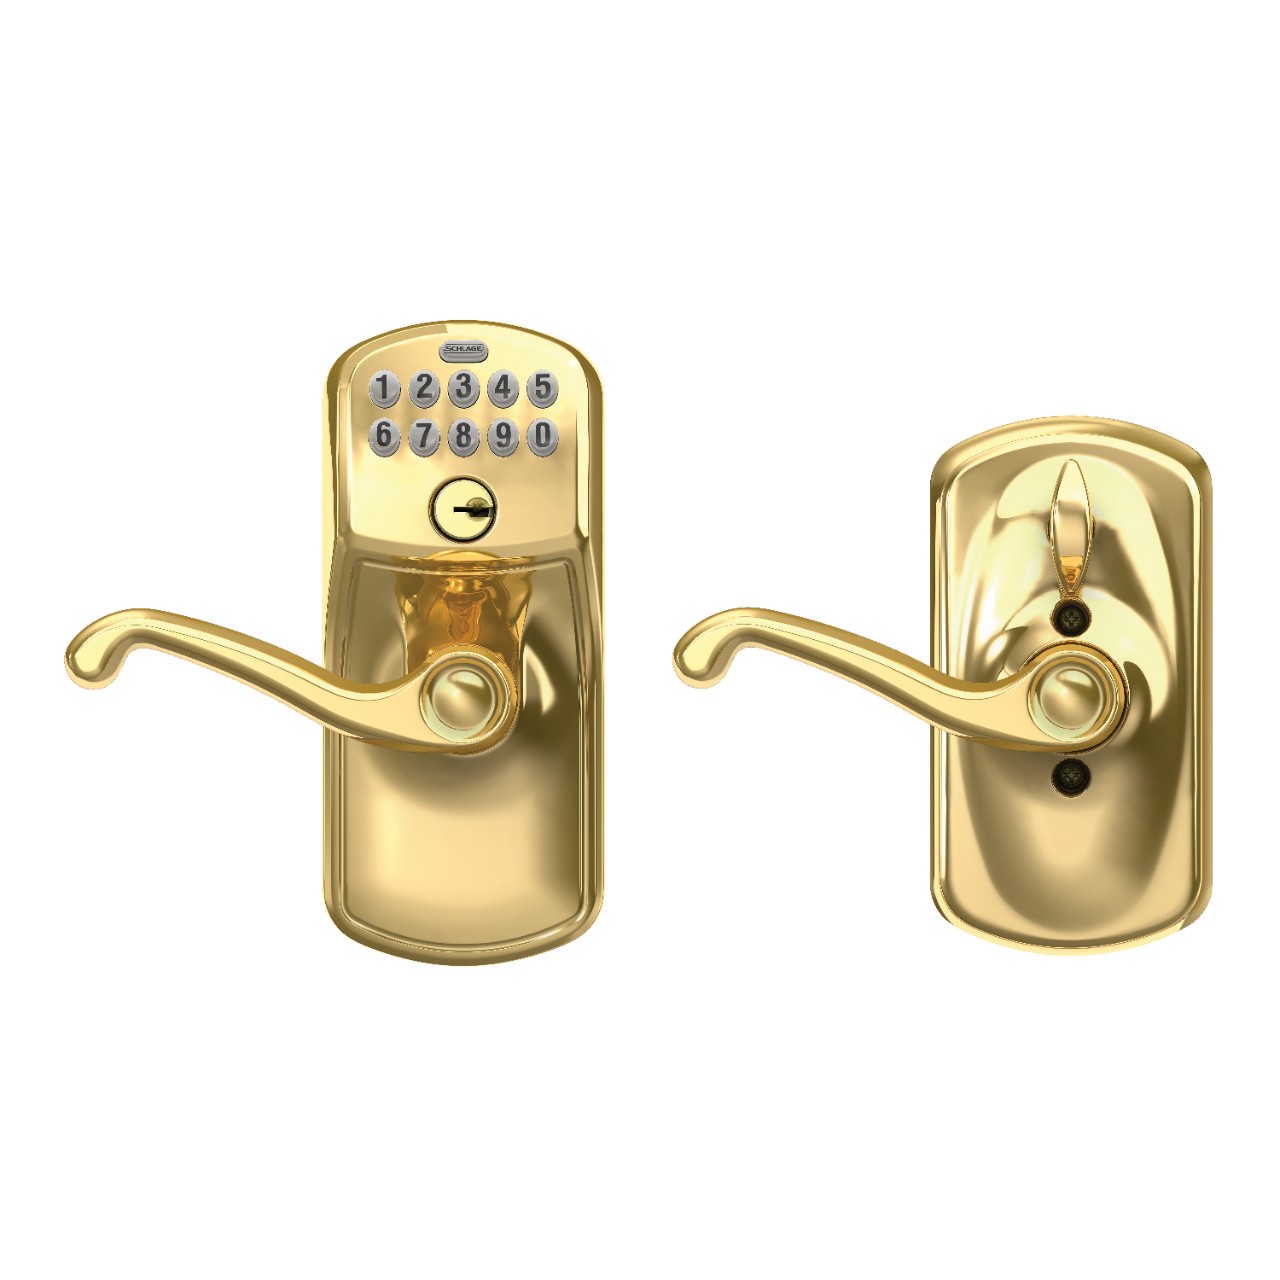 Keypad Lever and Flair Lever with Flex Lock